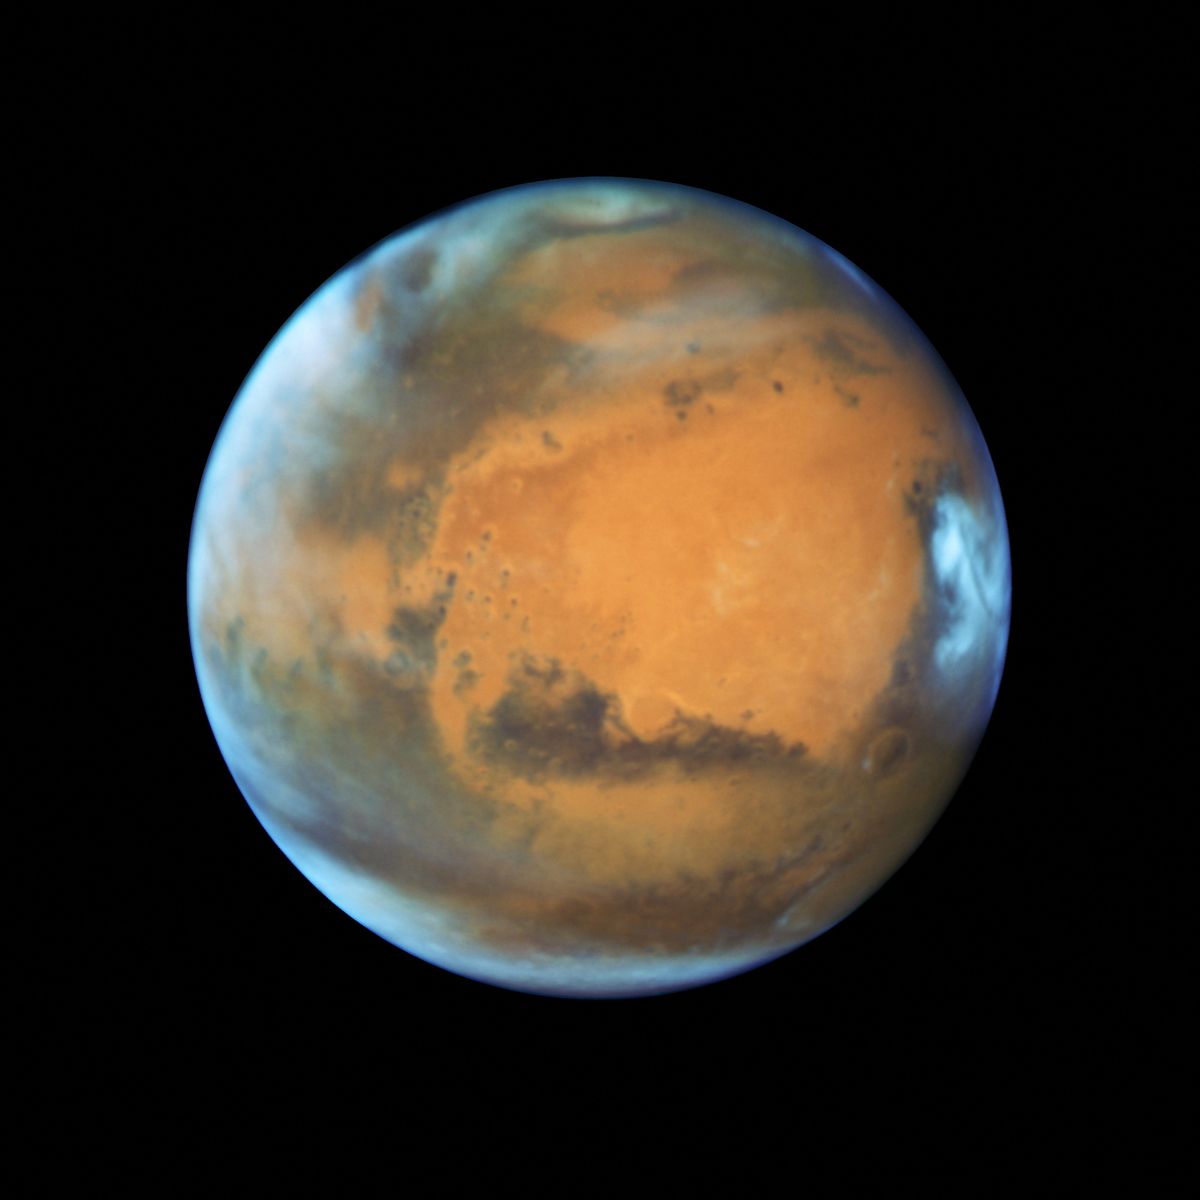 Chinese scientists invent a robot that can create oxygen on Mars